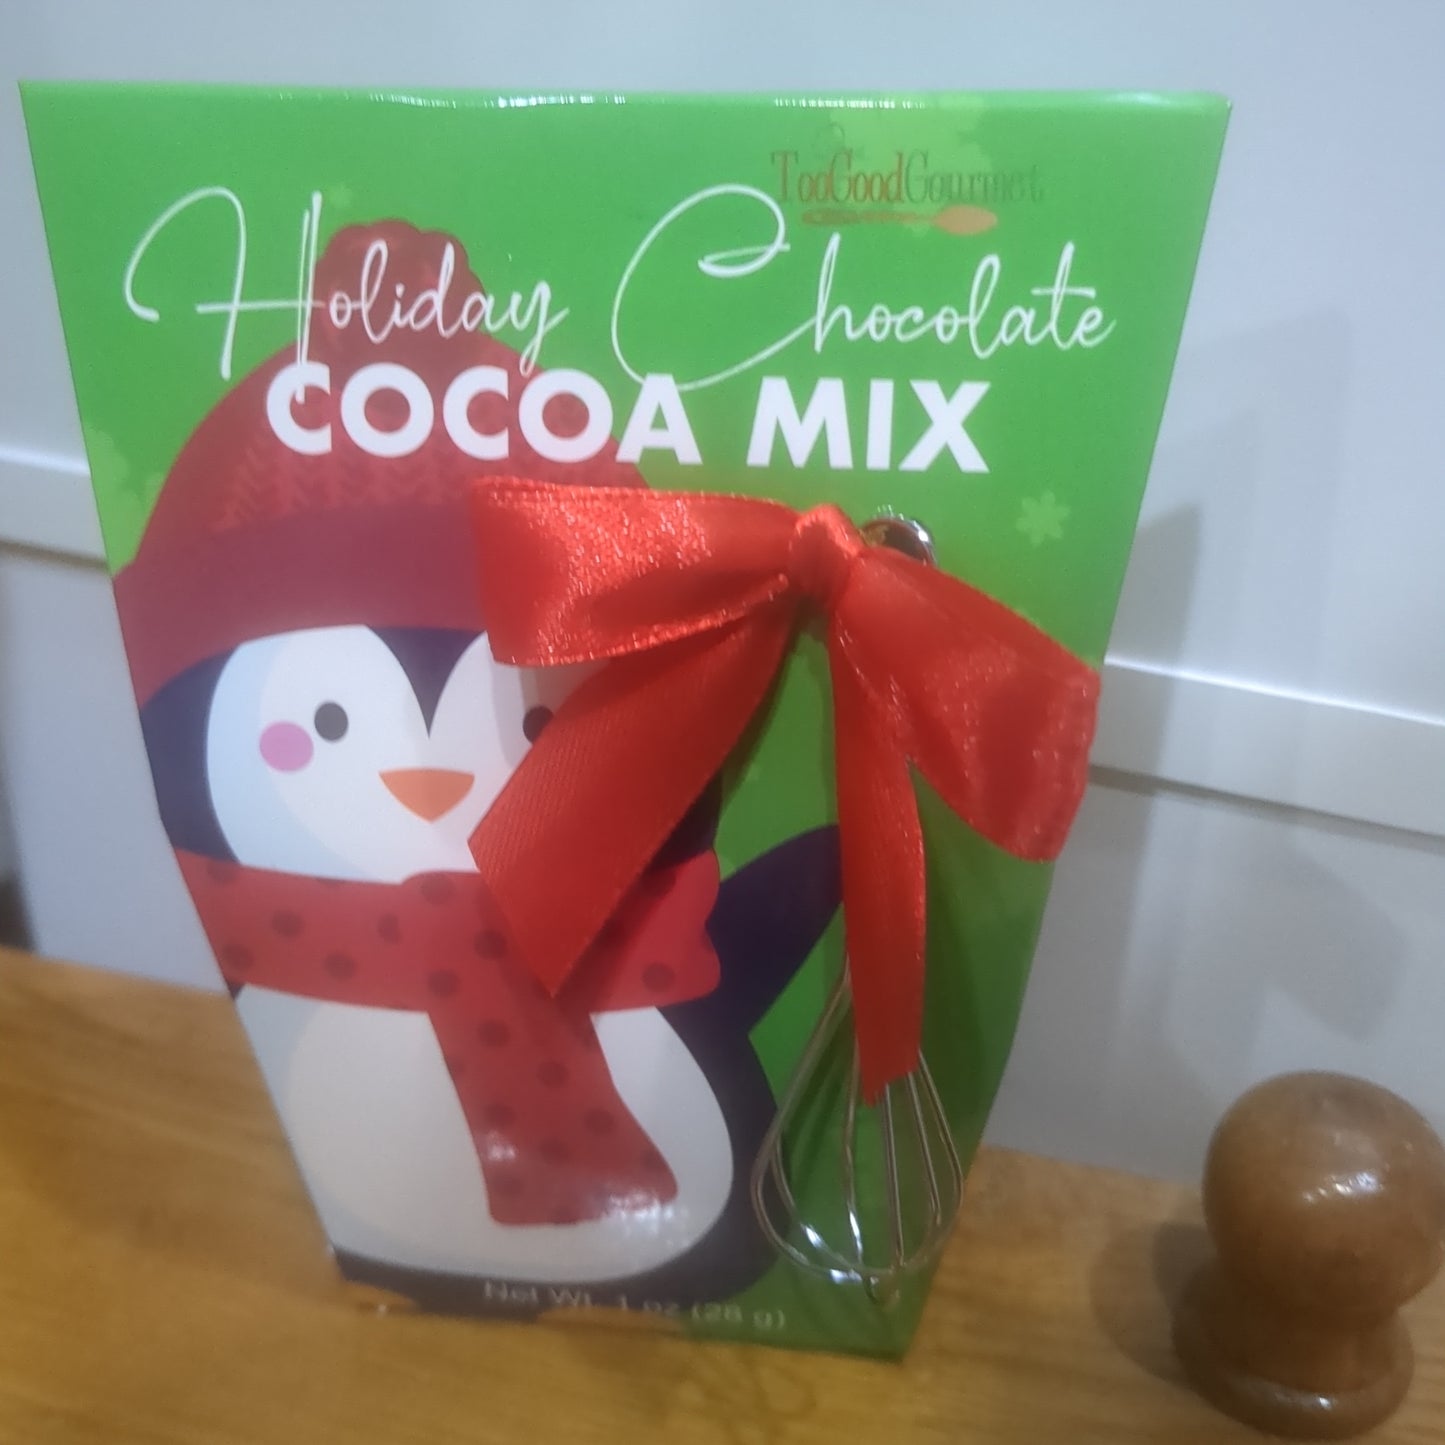 Santa Friend's chocolate cocoa mix from Too Good Gourmet